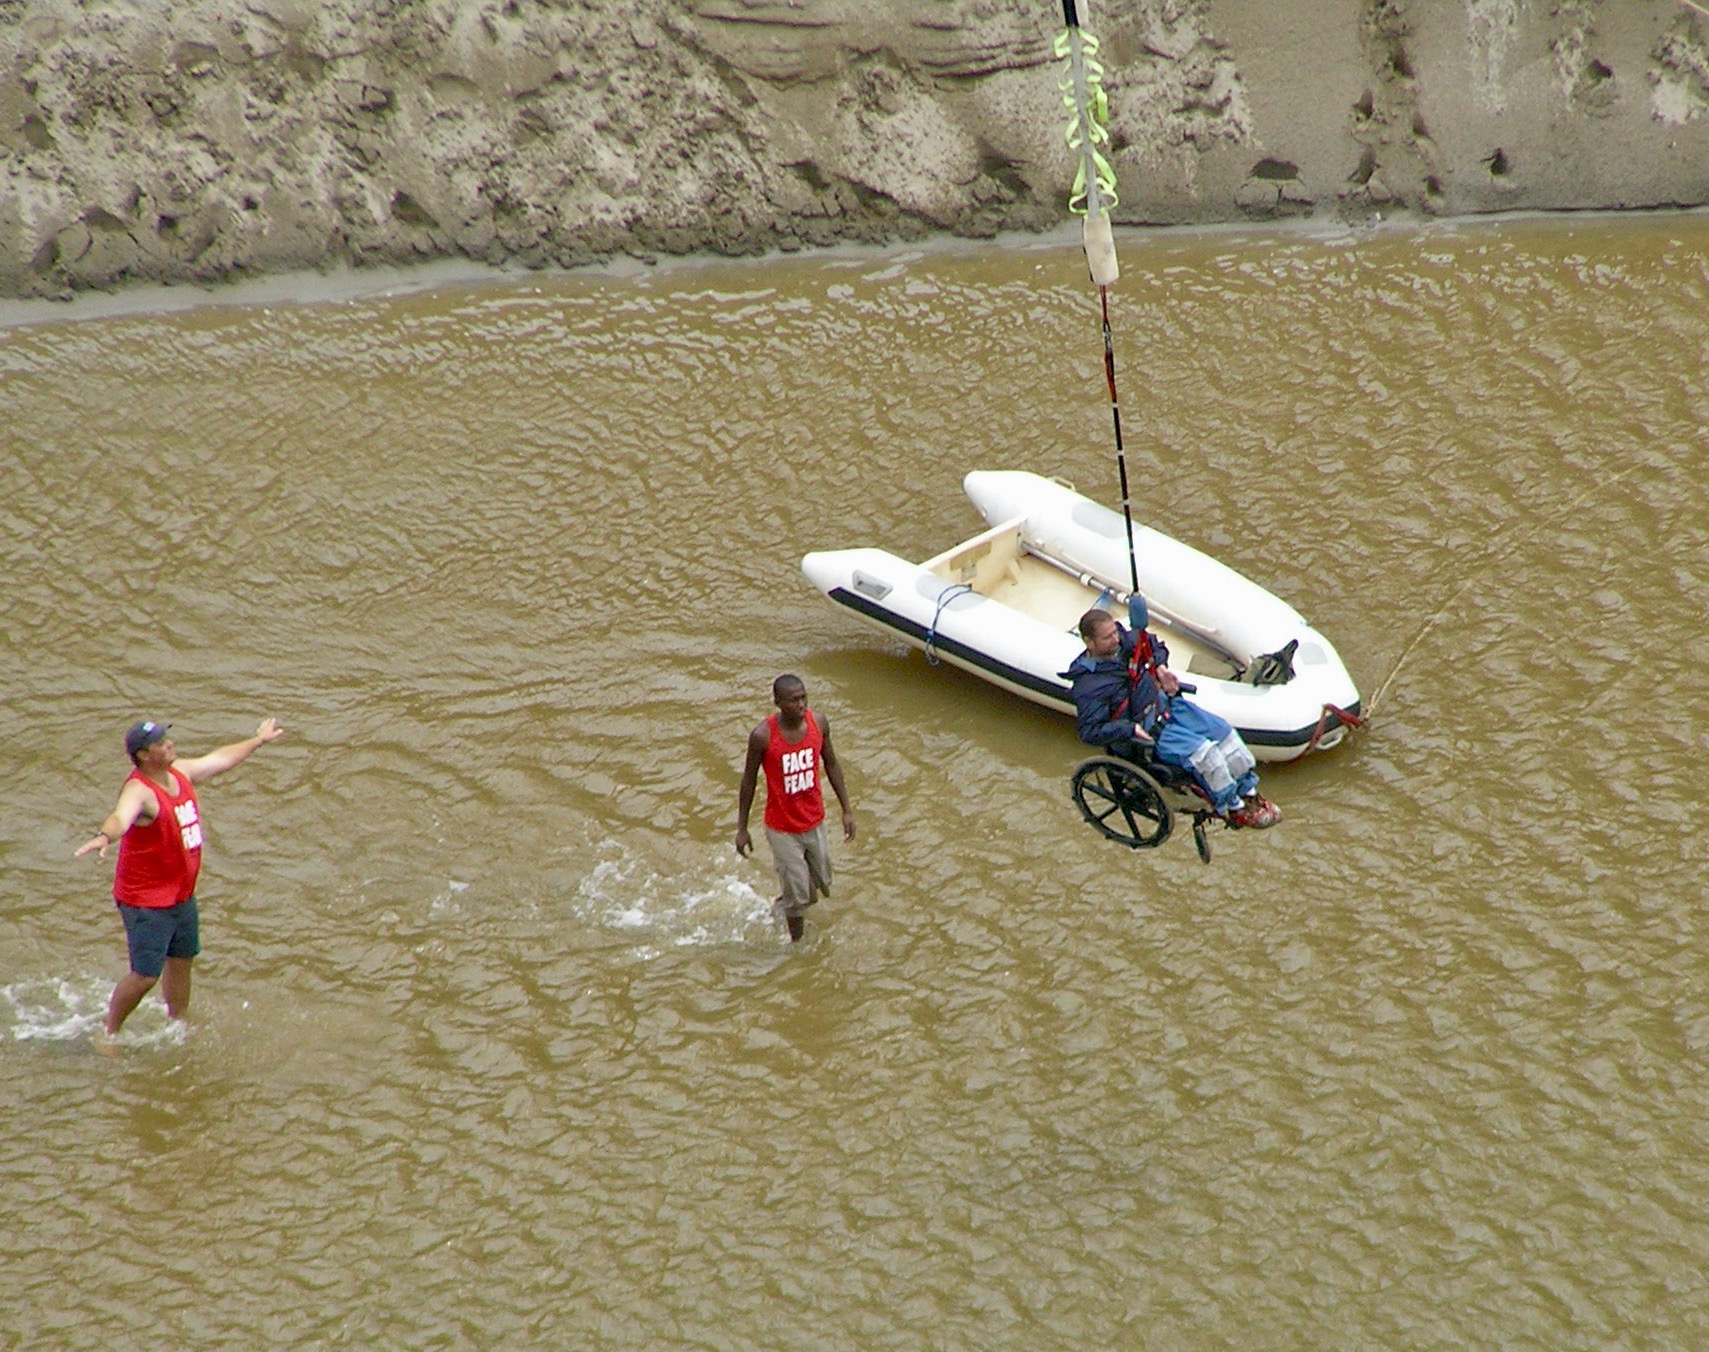 Gene bungee jumping from a bridge in South Africa over a river